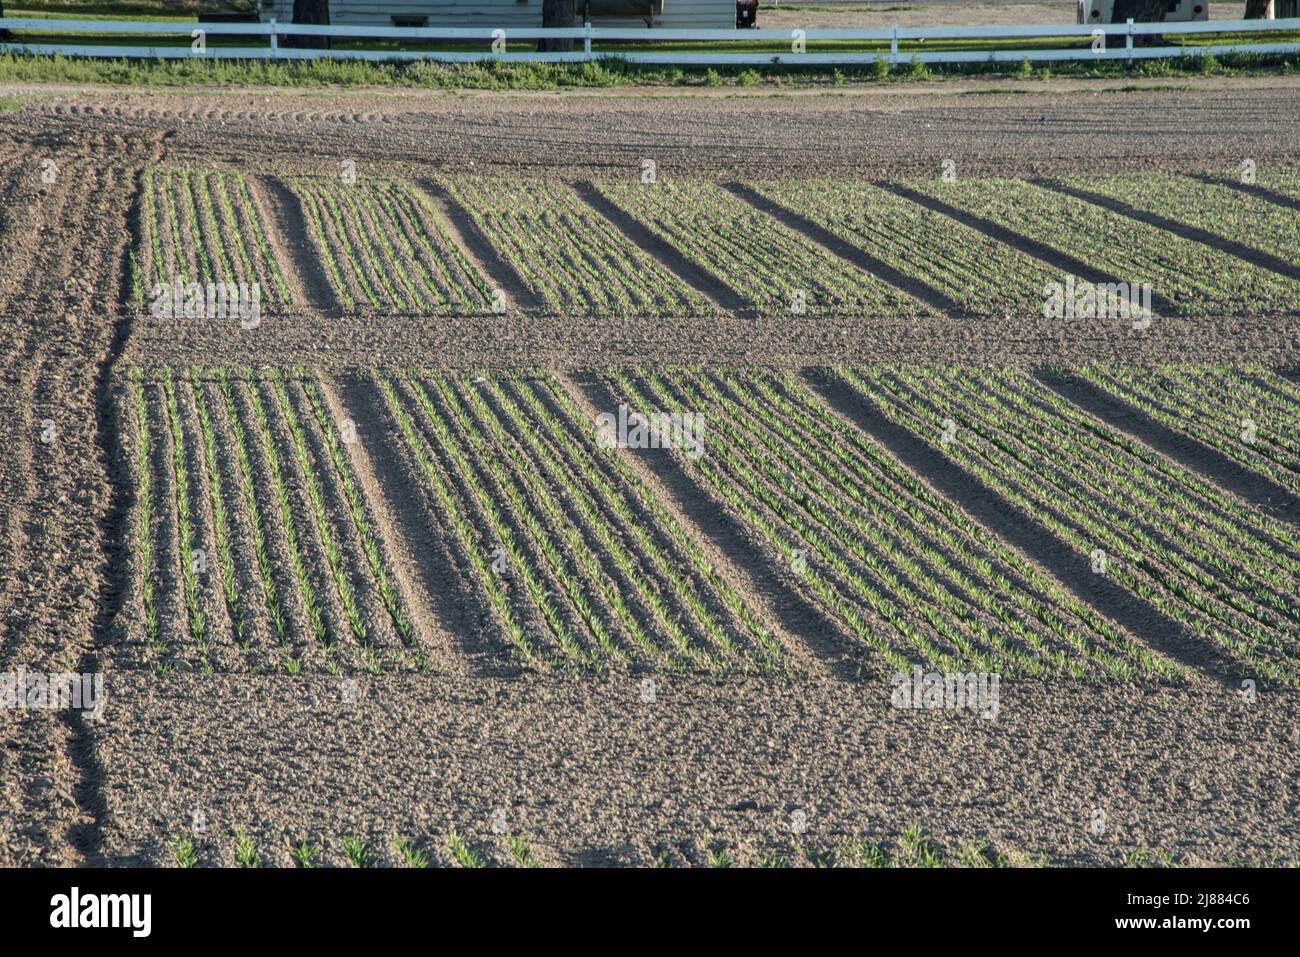 Grain test plots at Aberdeen Agricultural Experiment Station, Aberdeen, Idaho, USA Stock Photo